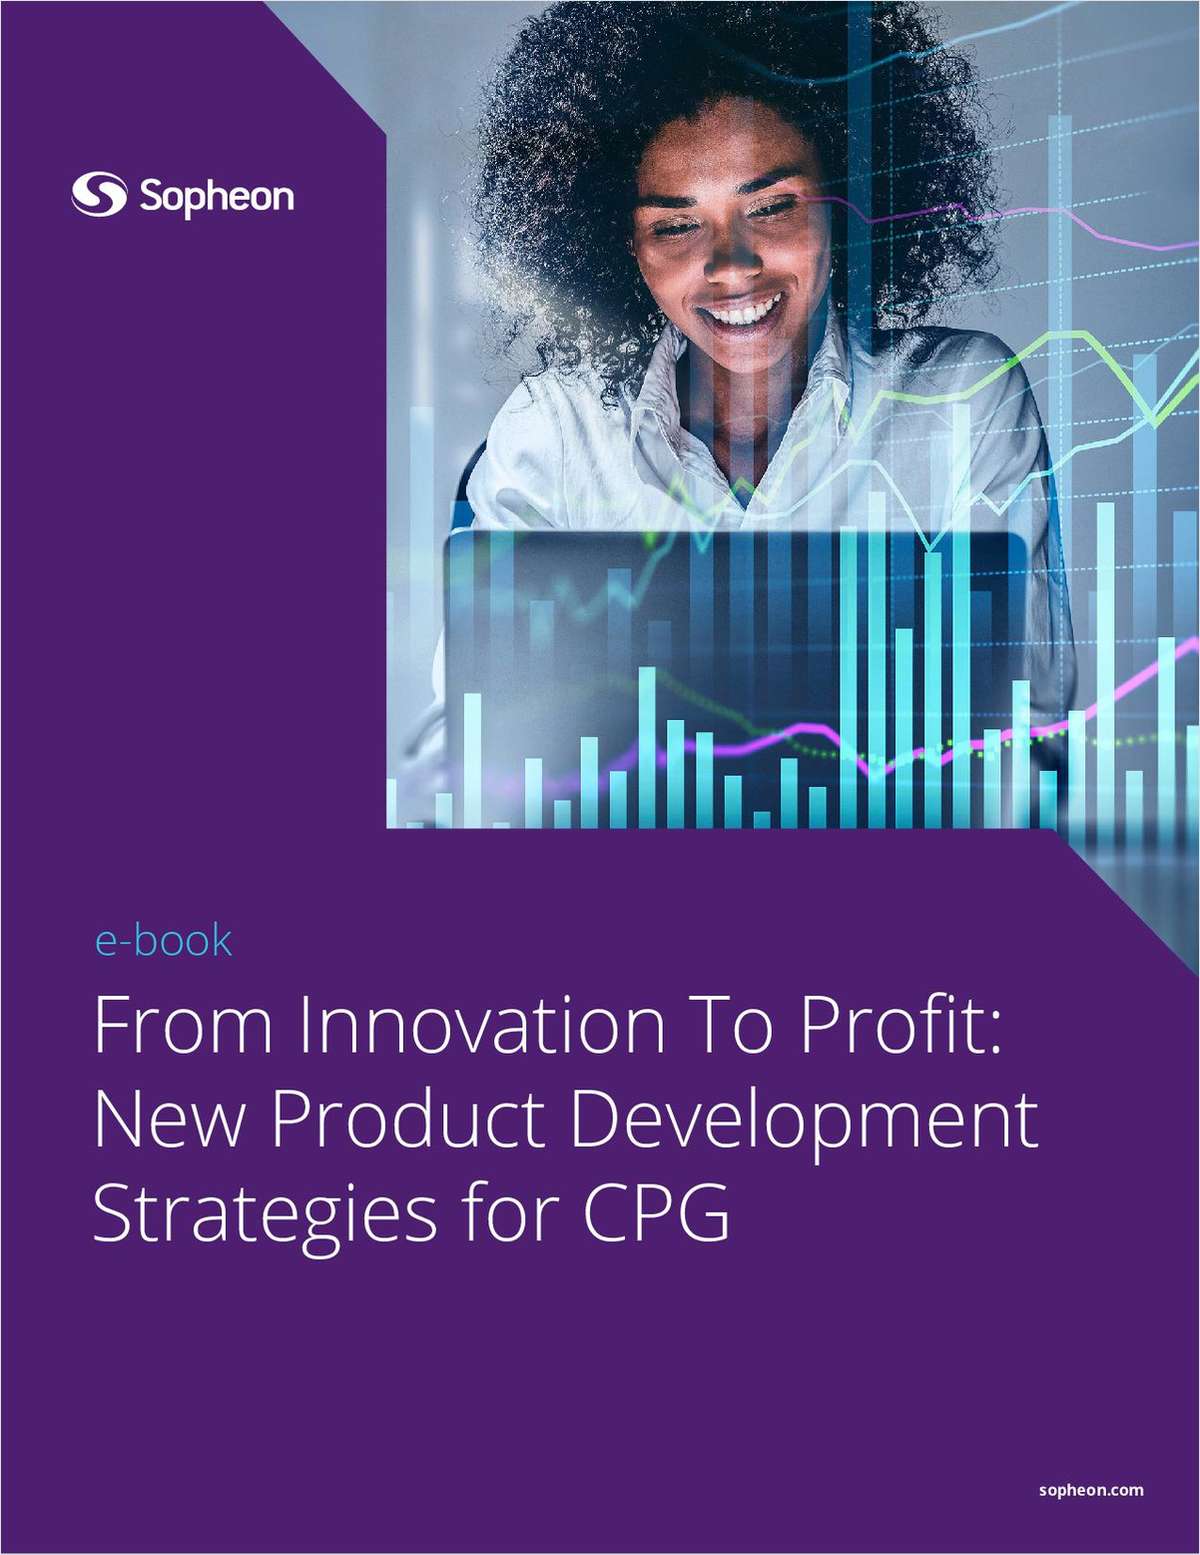 From Innovation to Profit: New Product Development Strategies for CPG